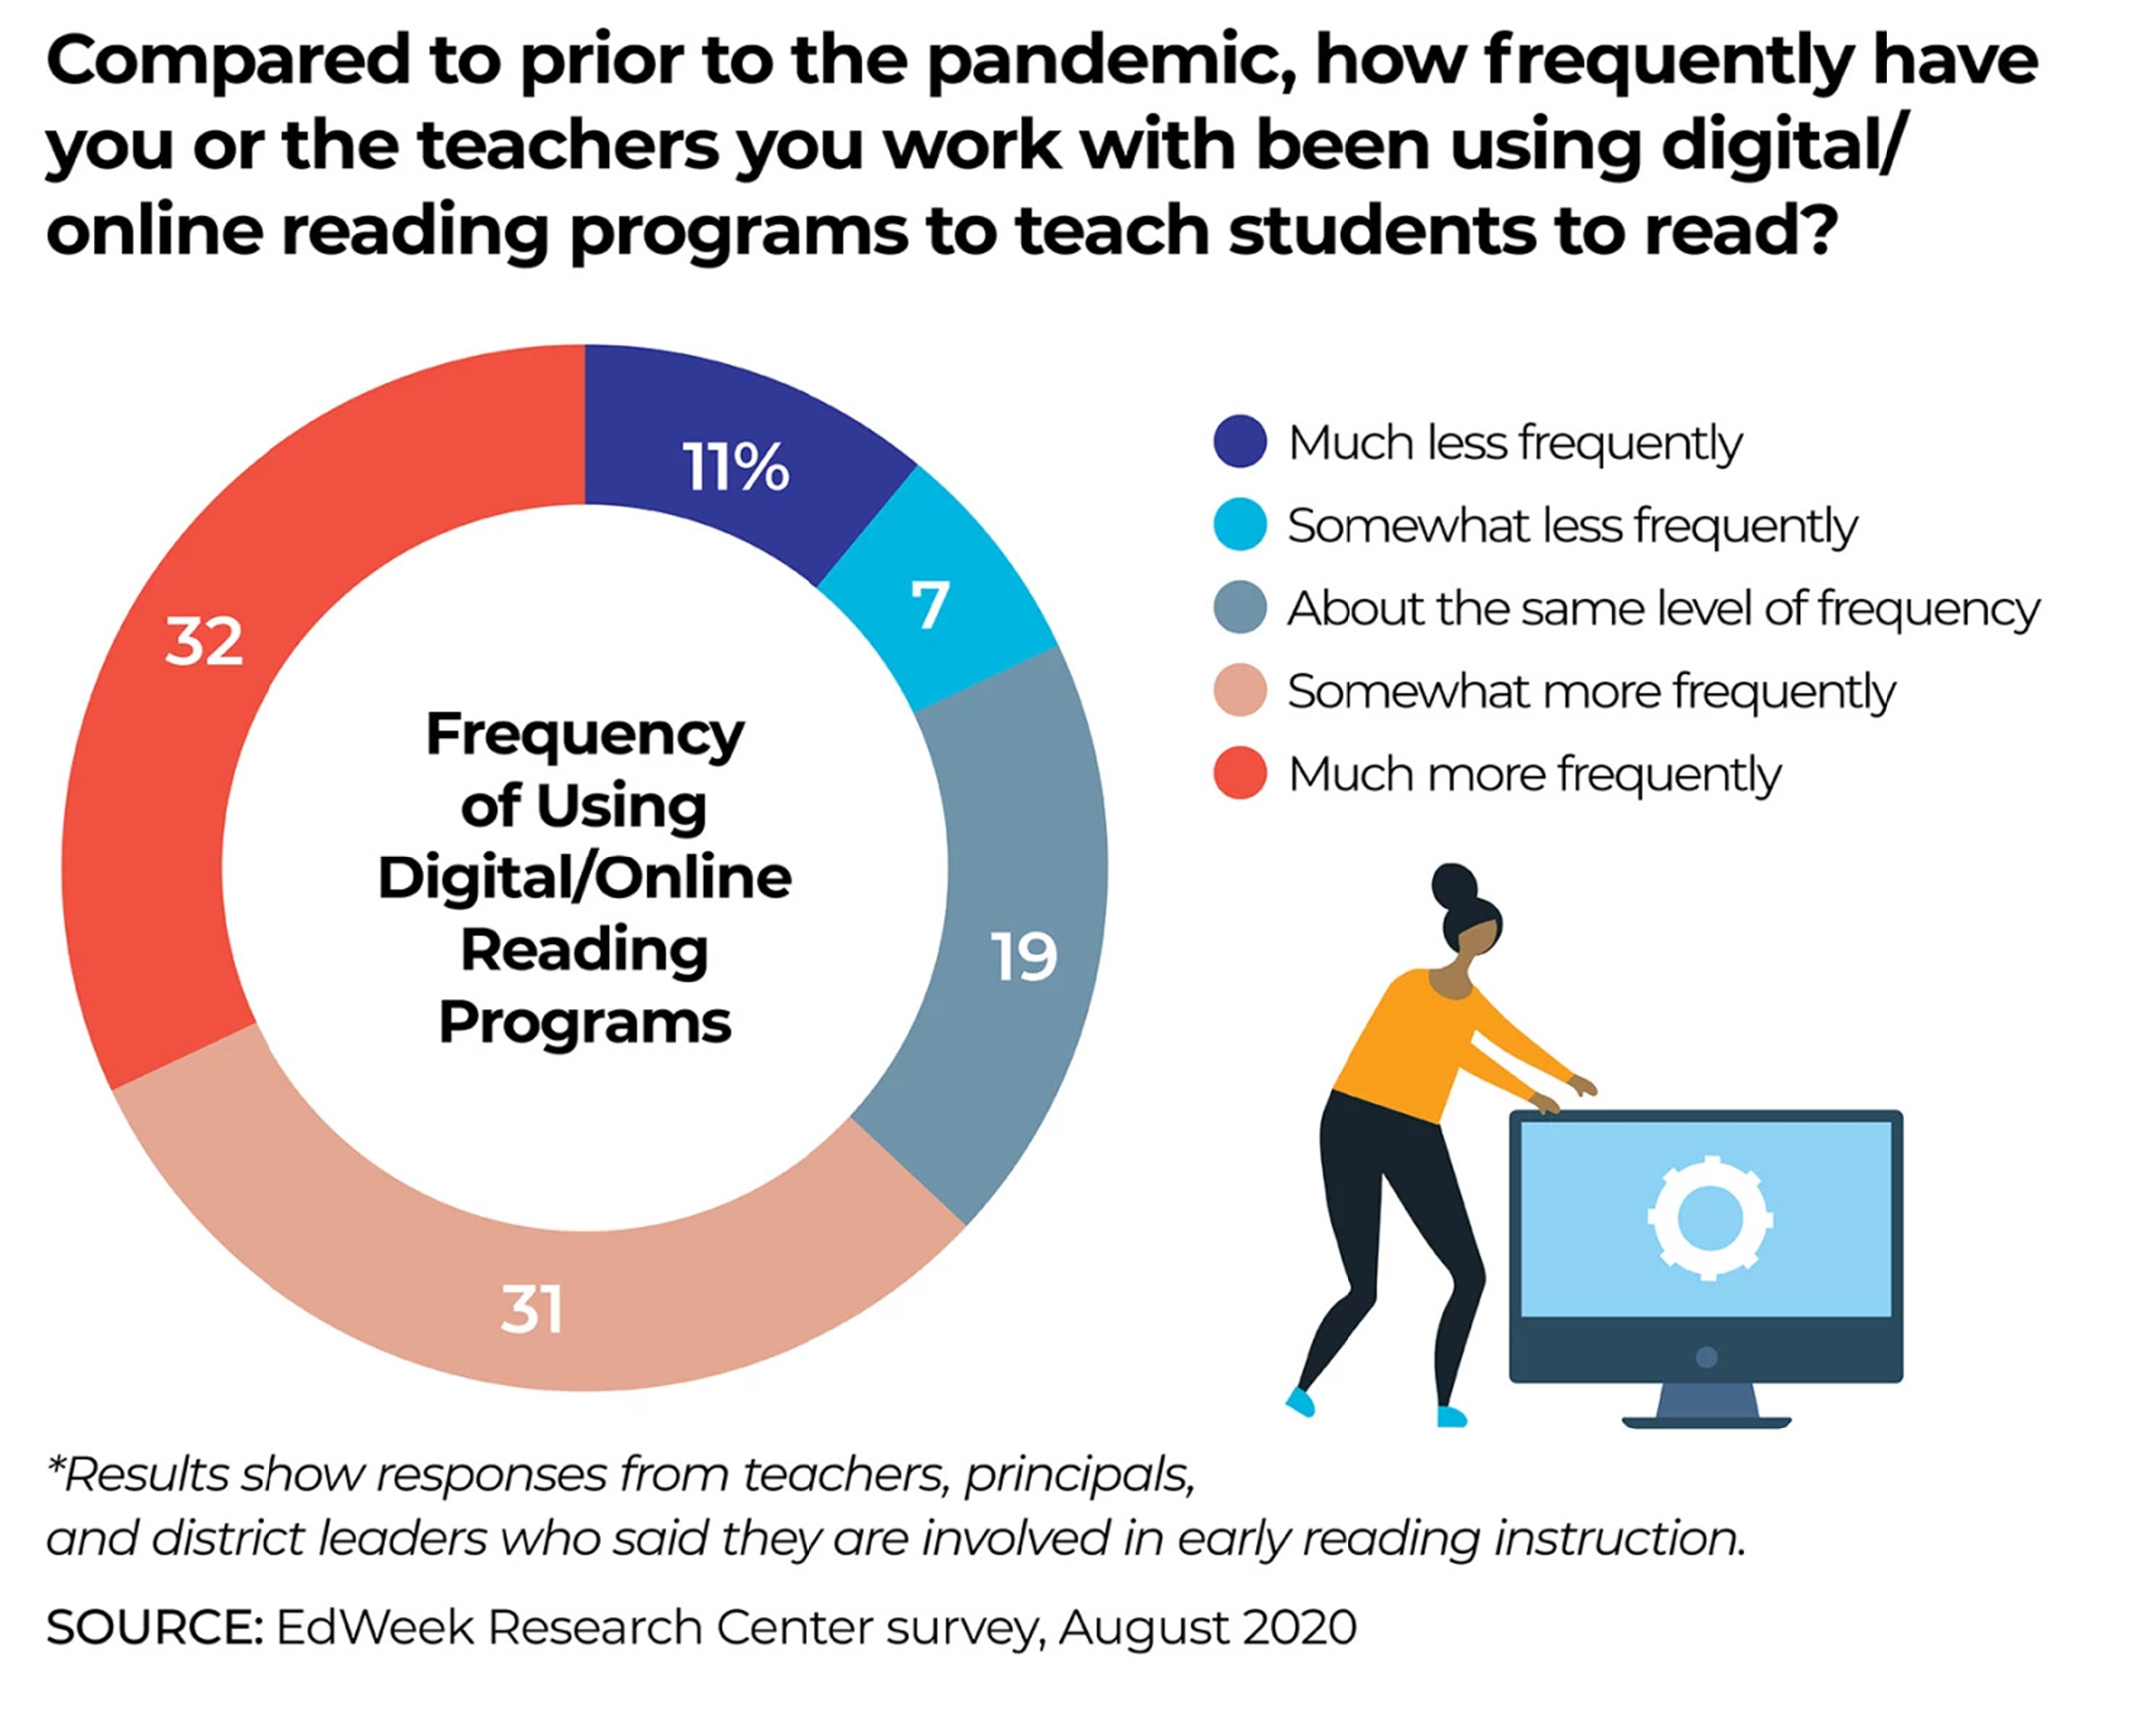 Circular chart tracking Frequency of Using Digital/Online Reading Programs, with five values in different colors: 32%, 31%, 19%, 11%, 7%